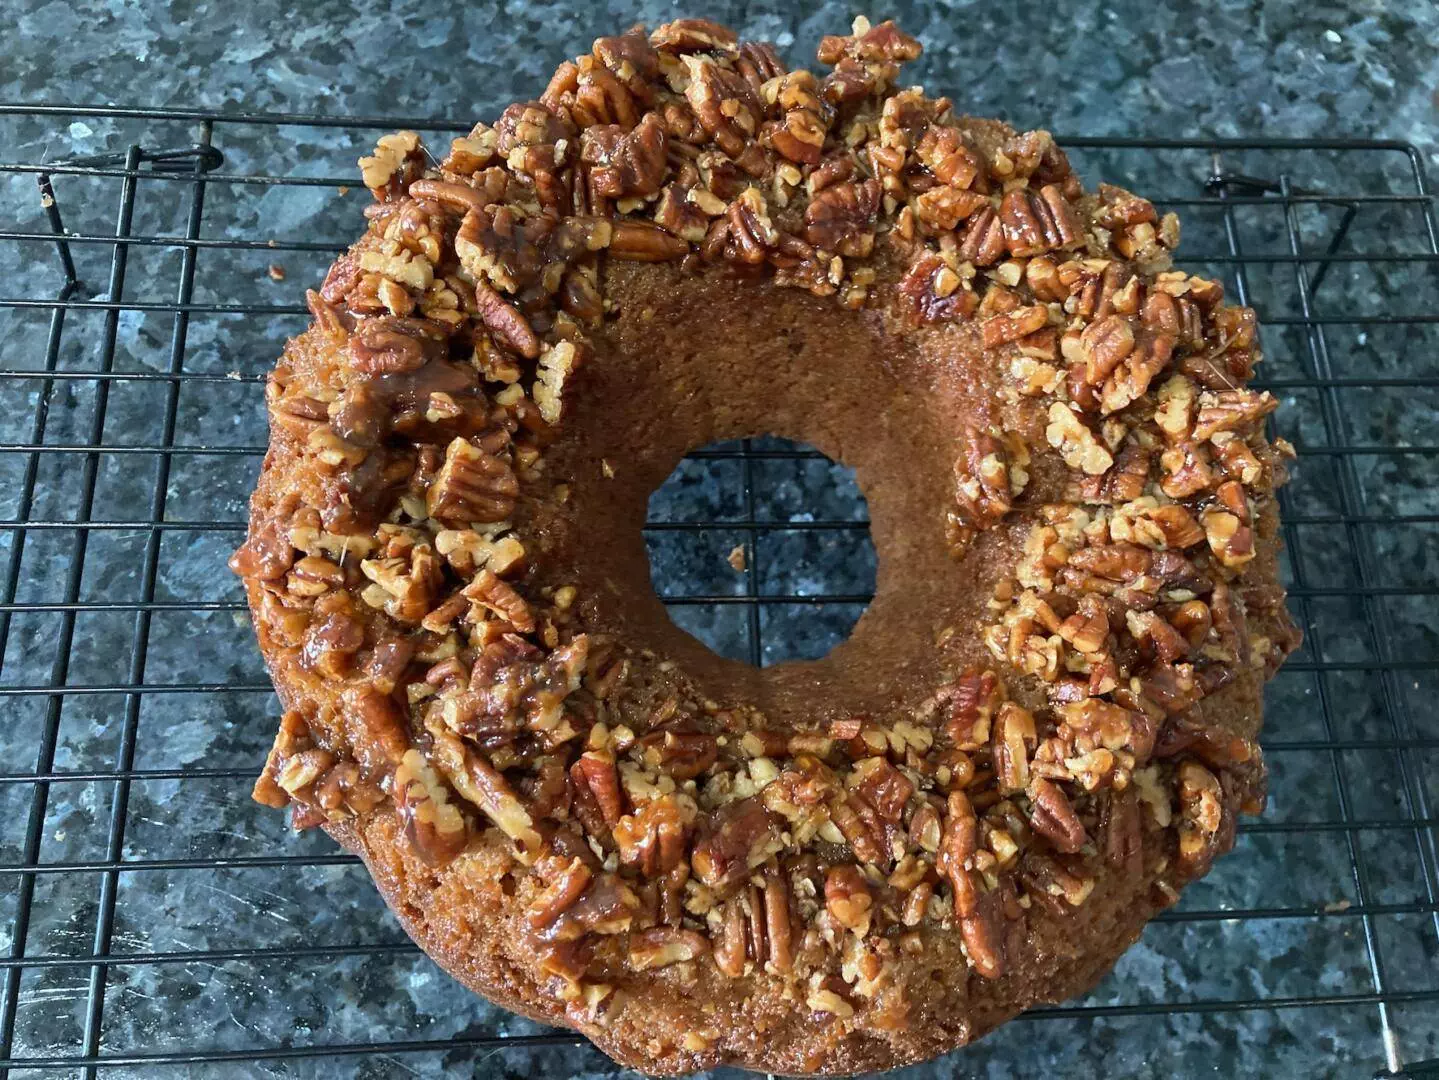 Butter Pecan Bundt Cake (with Praline Topping) from Out of the Box Baking.com